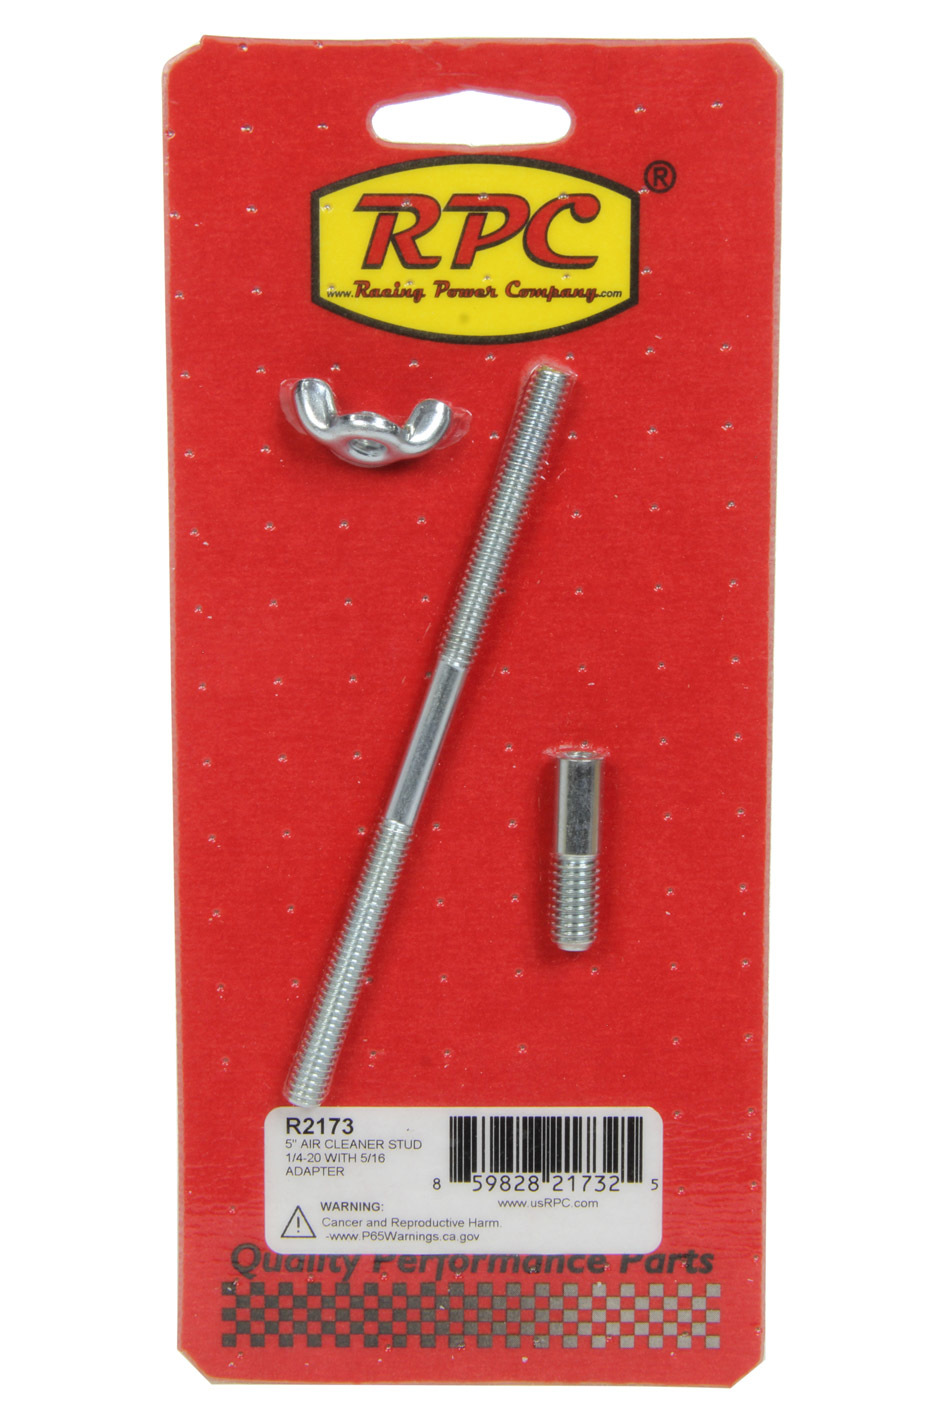 Racing Power Company R2173 Air Cleaner Stud, 1/4-20 in Thread, 5 in Long, 5/16 Adapter, Steel, Zinc Oxide, Each